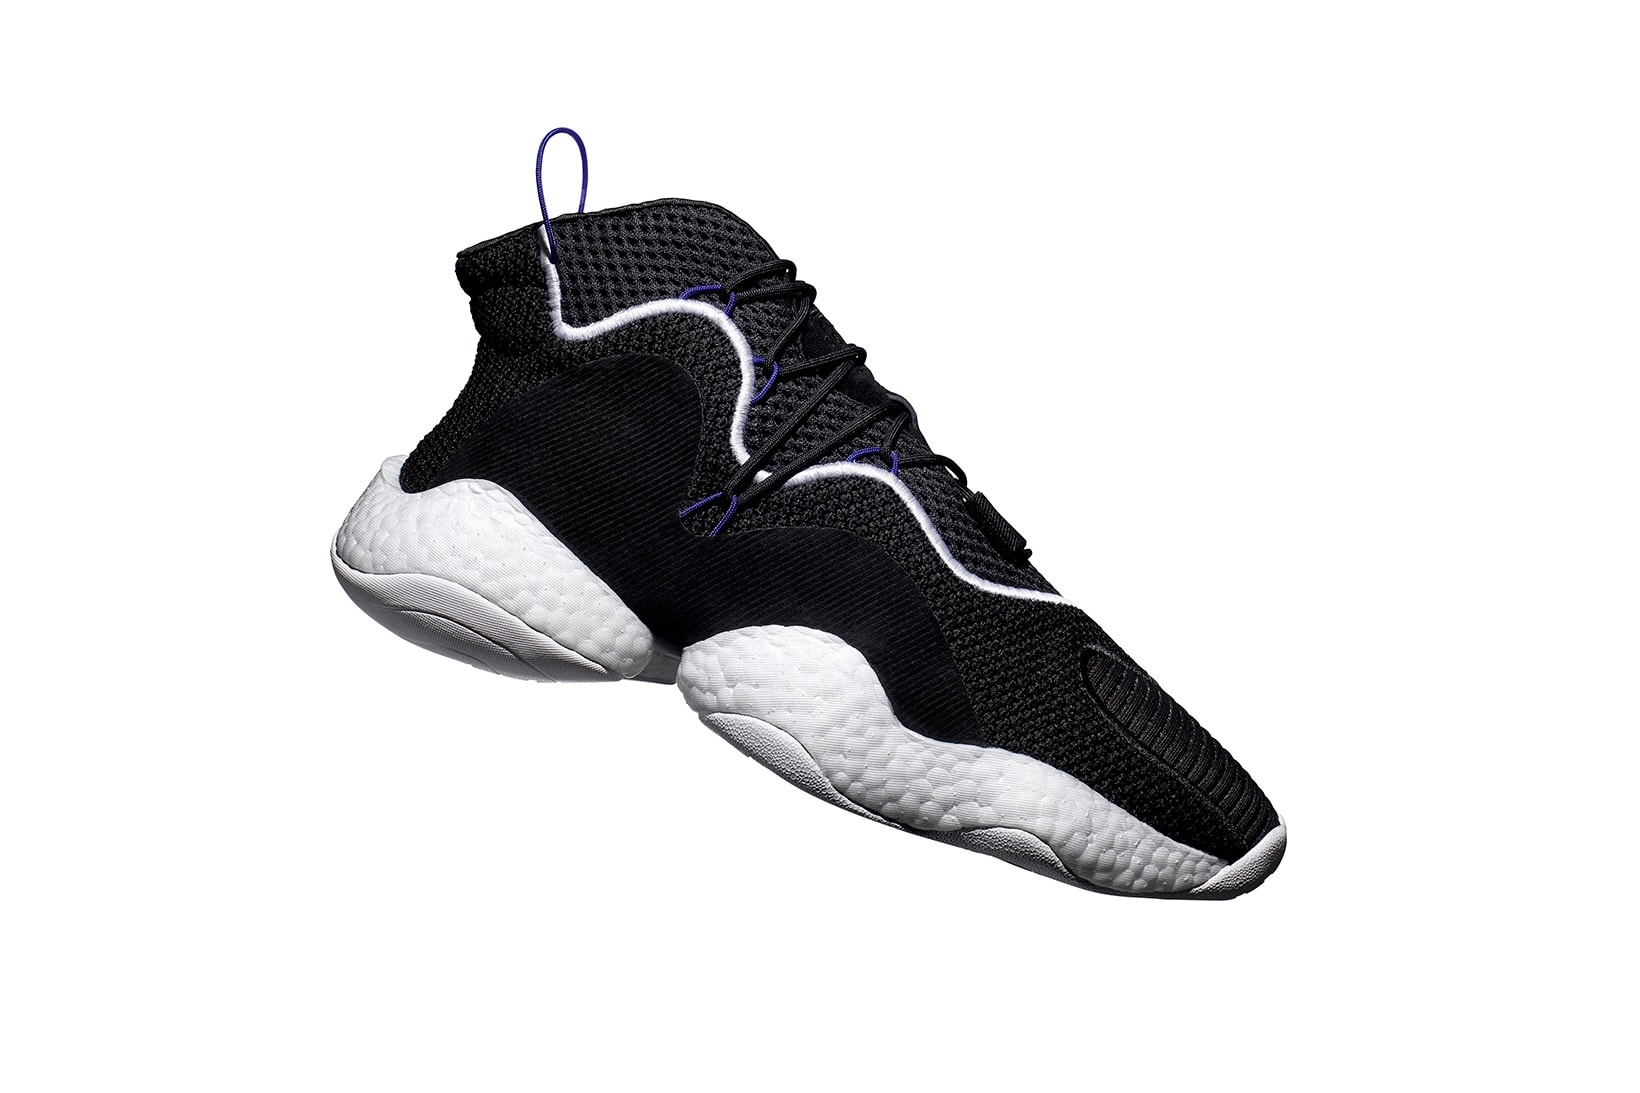 adidas Originals Crazy BYW Official Announcement White Black Basketball Lifestyle Sneakers Release Date Info Drops January 27 2018 February 15